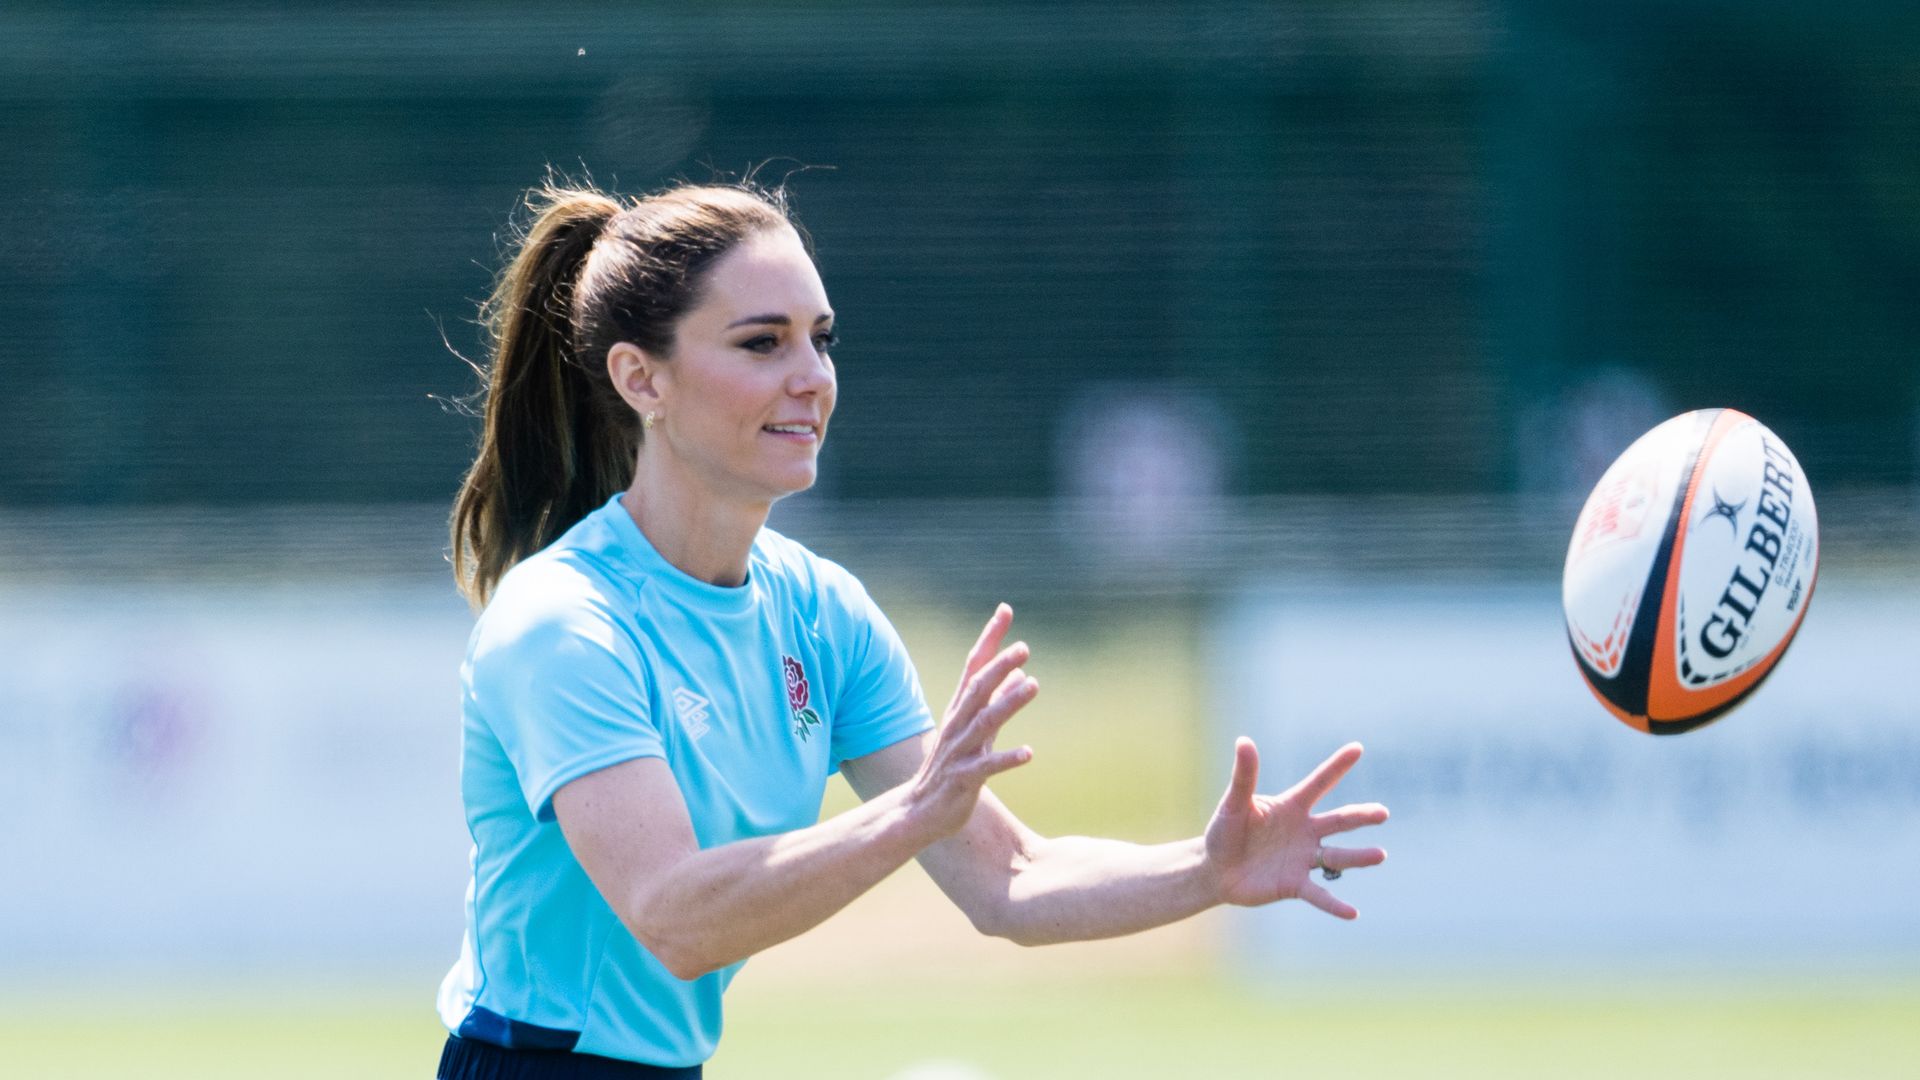 Kate Middleton catches rugby ball at Maidenhead Rugby Club